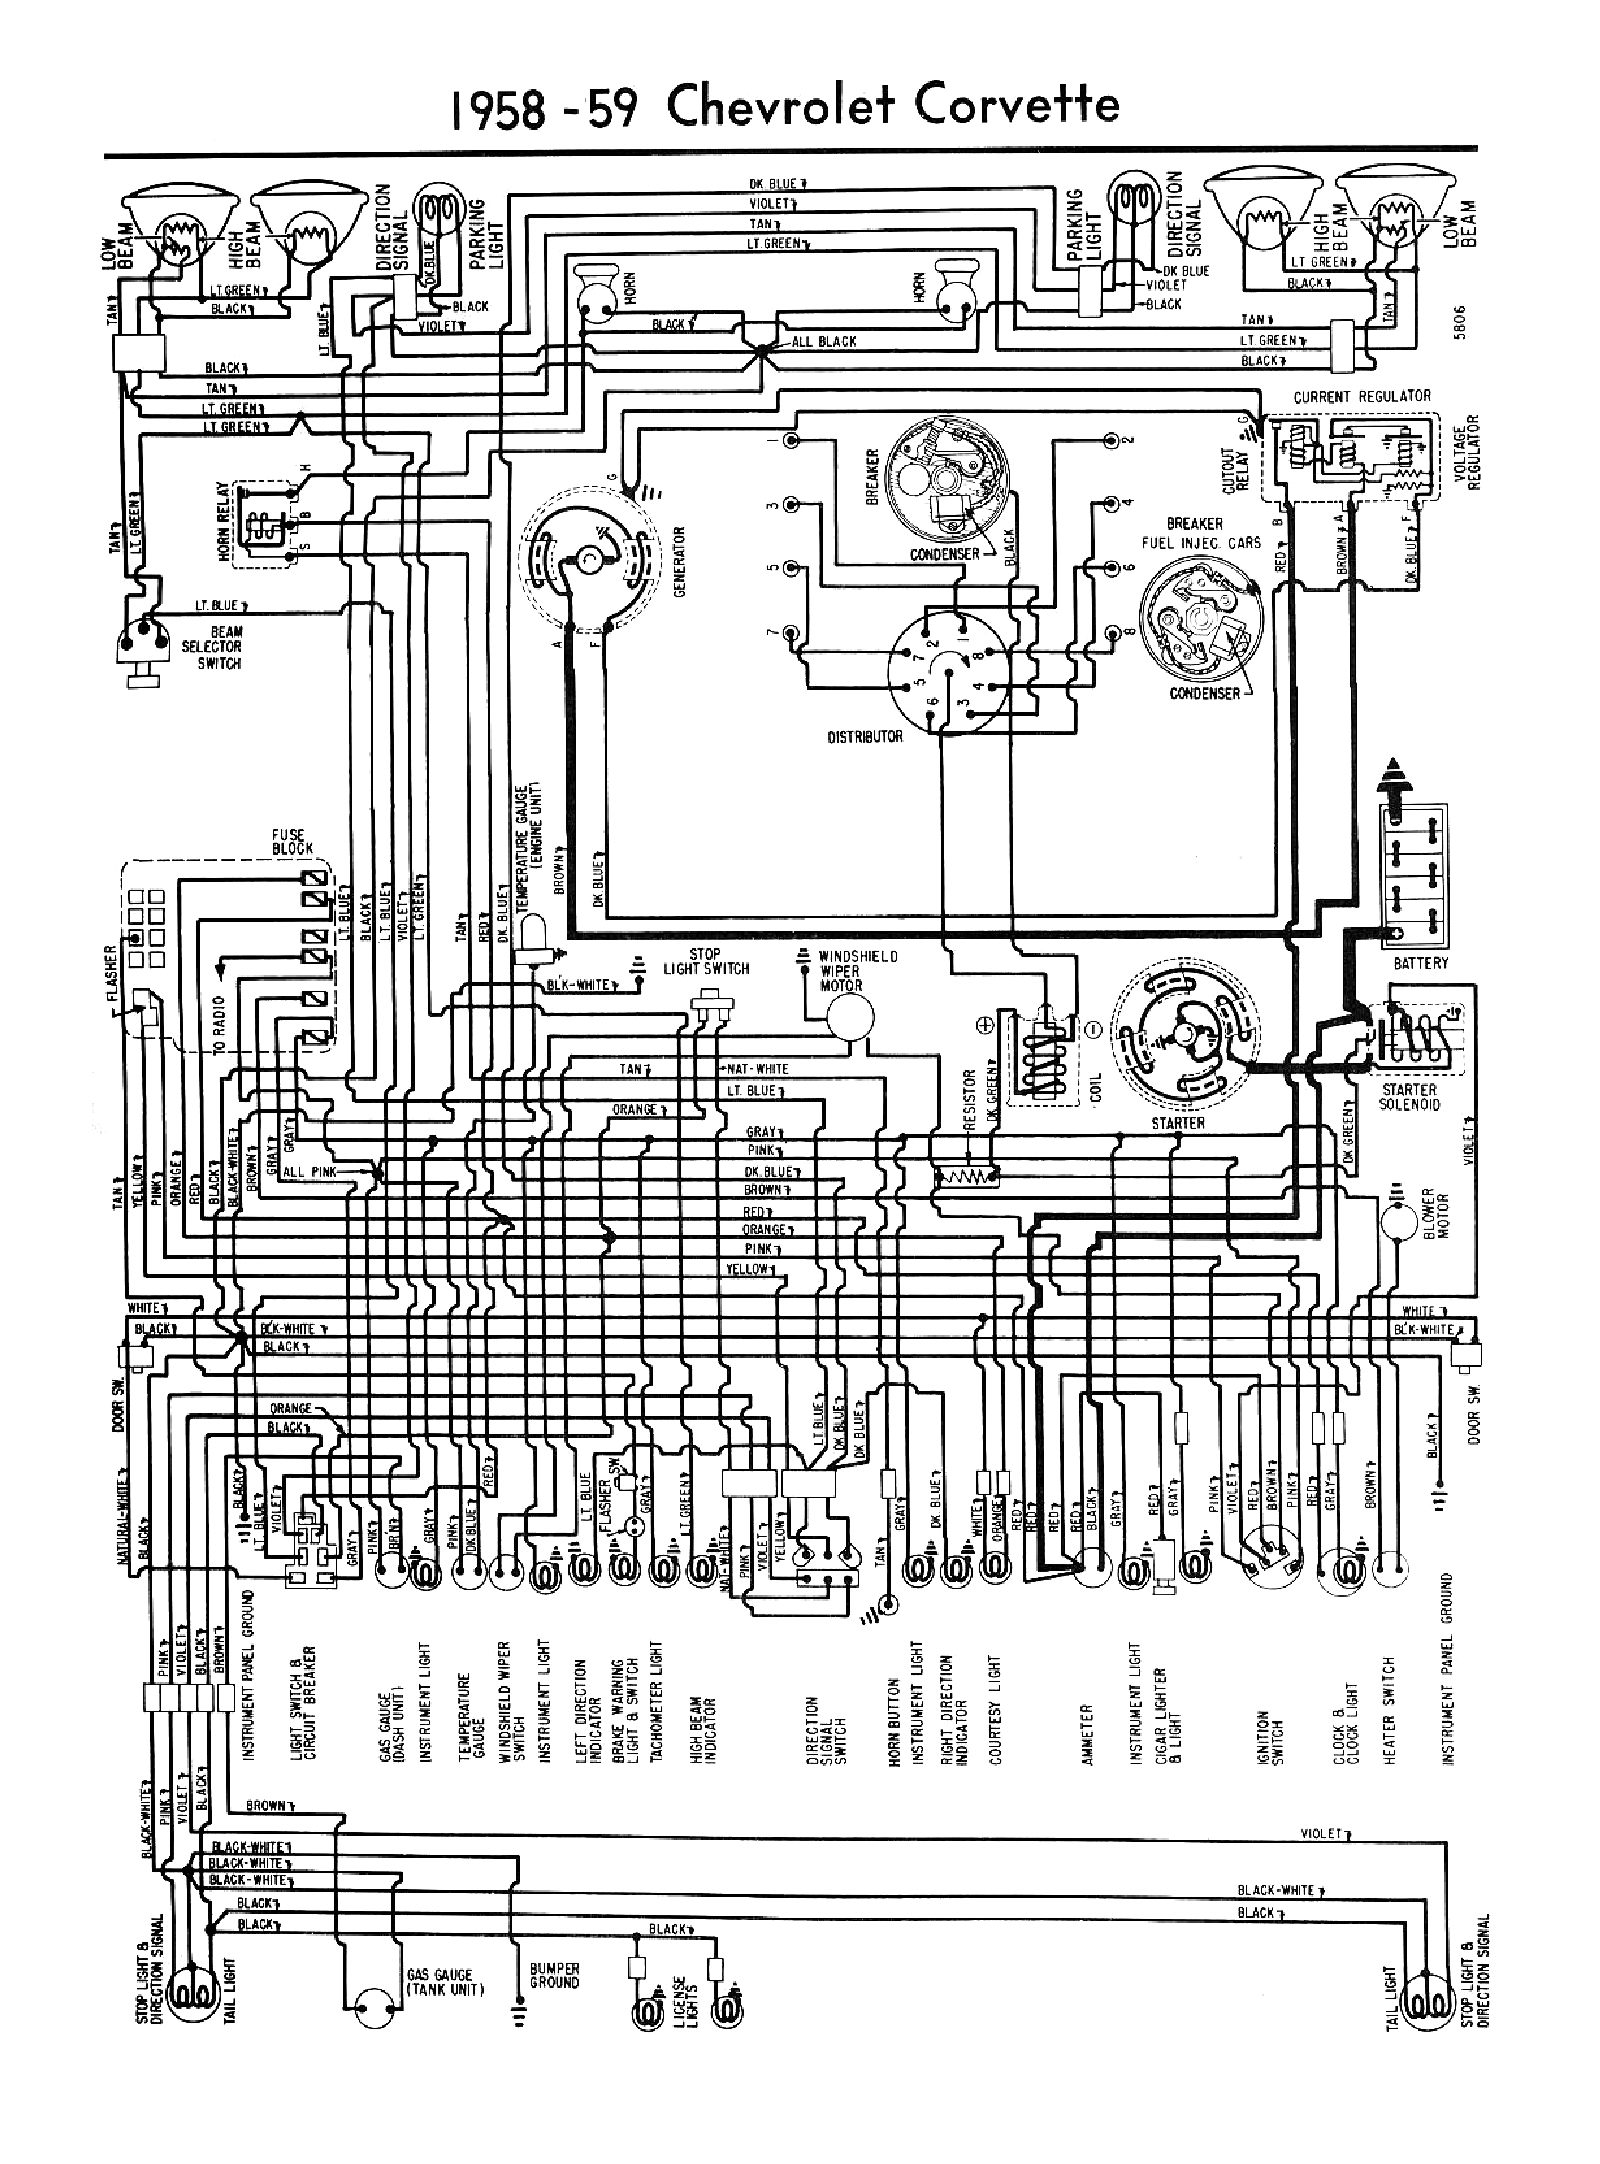 1962 Chevrolet C60 Wiring Diagram from chevy.oldcarmanualproject.com